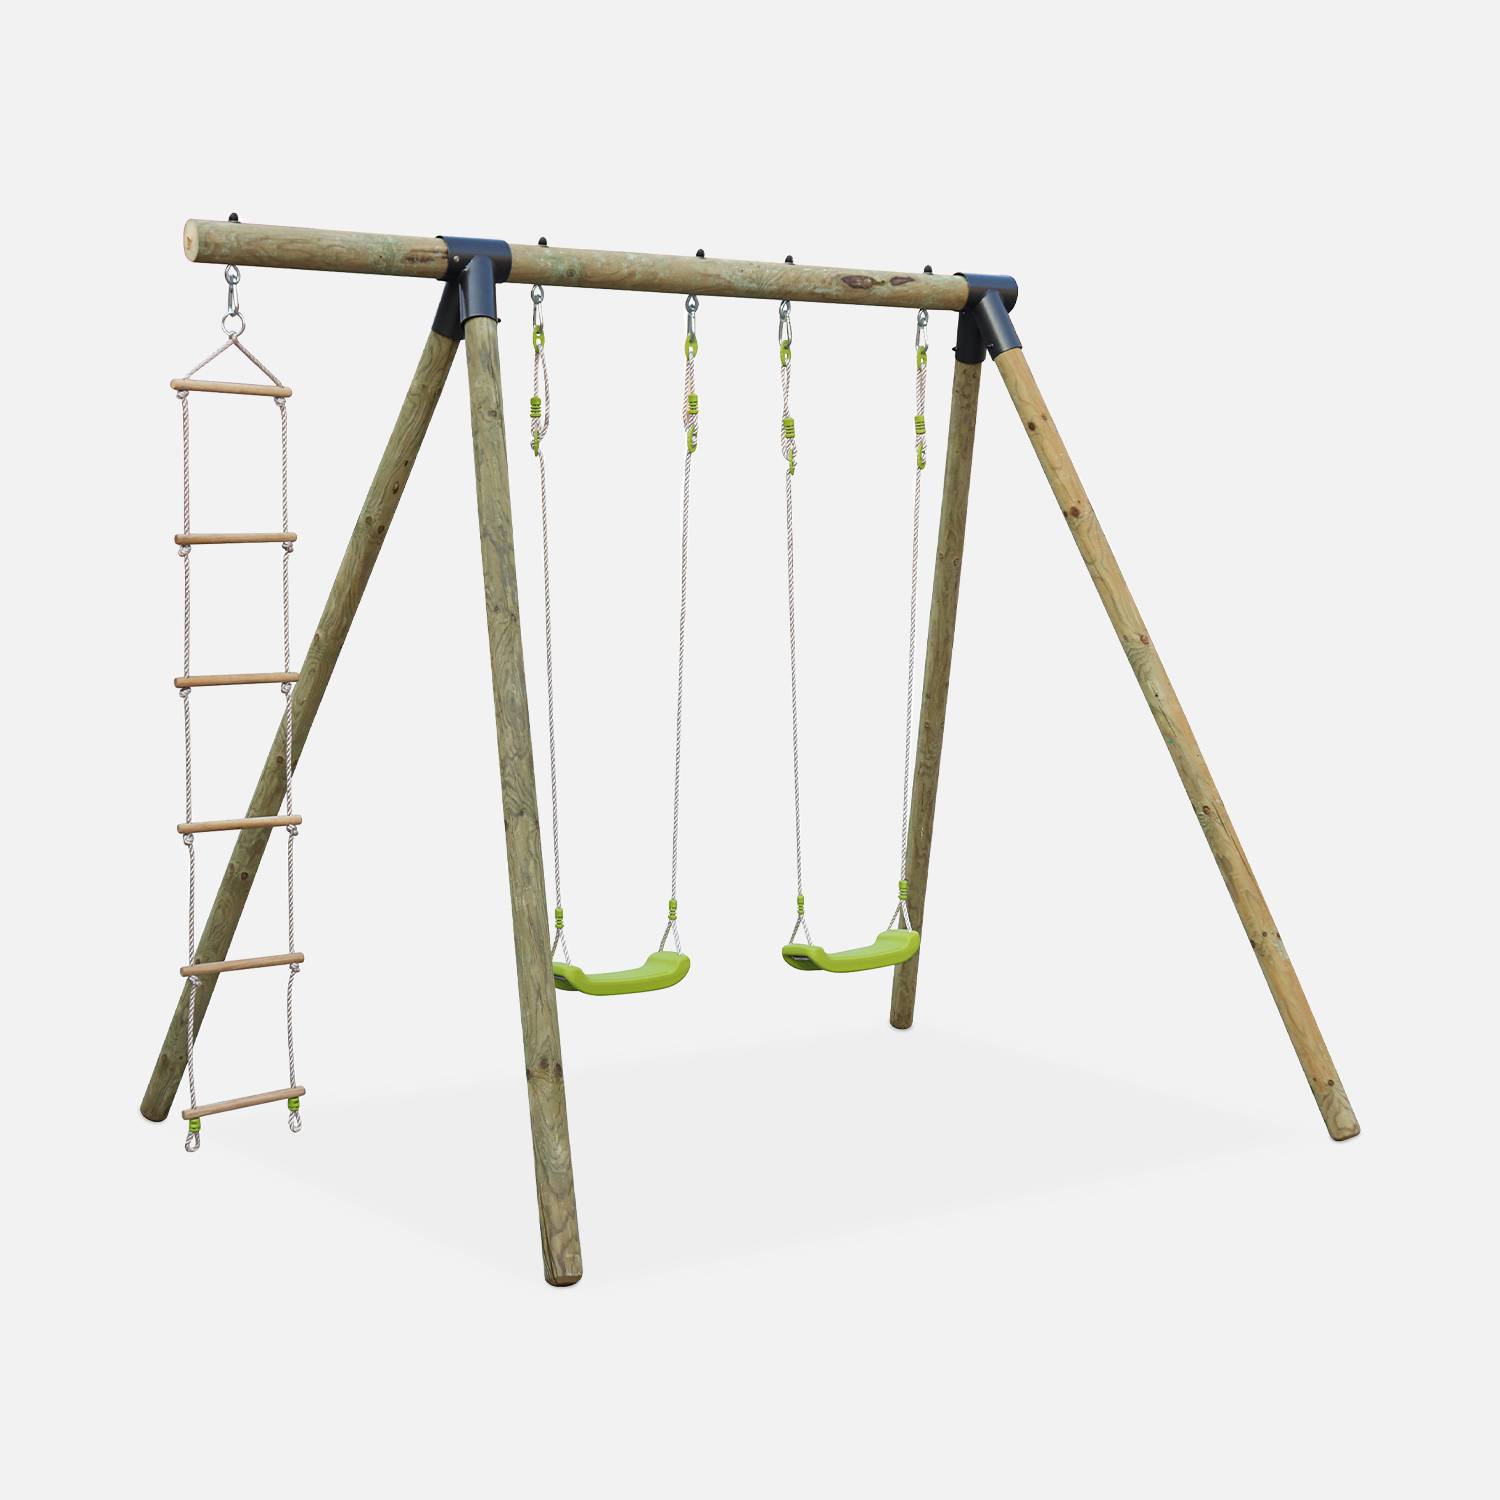 Wooden swing set with two swings and climbing rope ladder - pressure treated FSC pine - Mistral,sweeek,Photo1